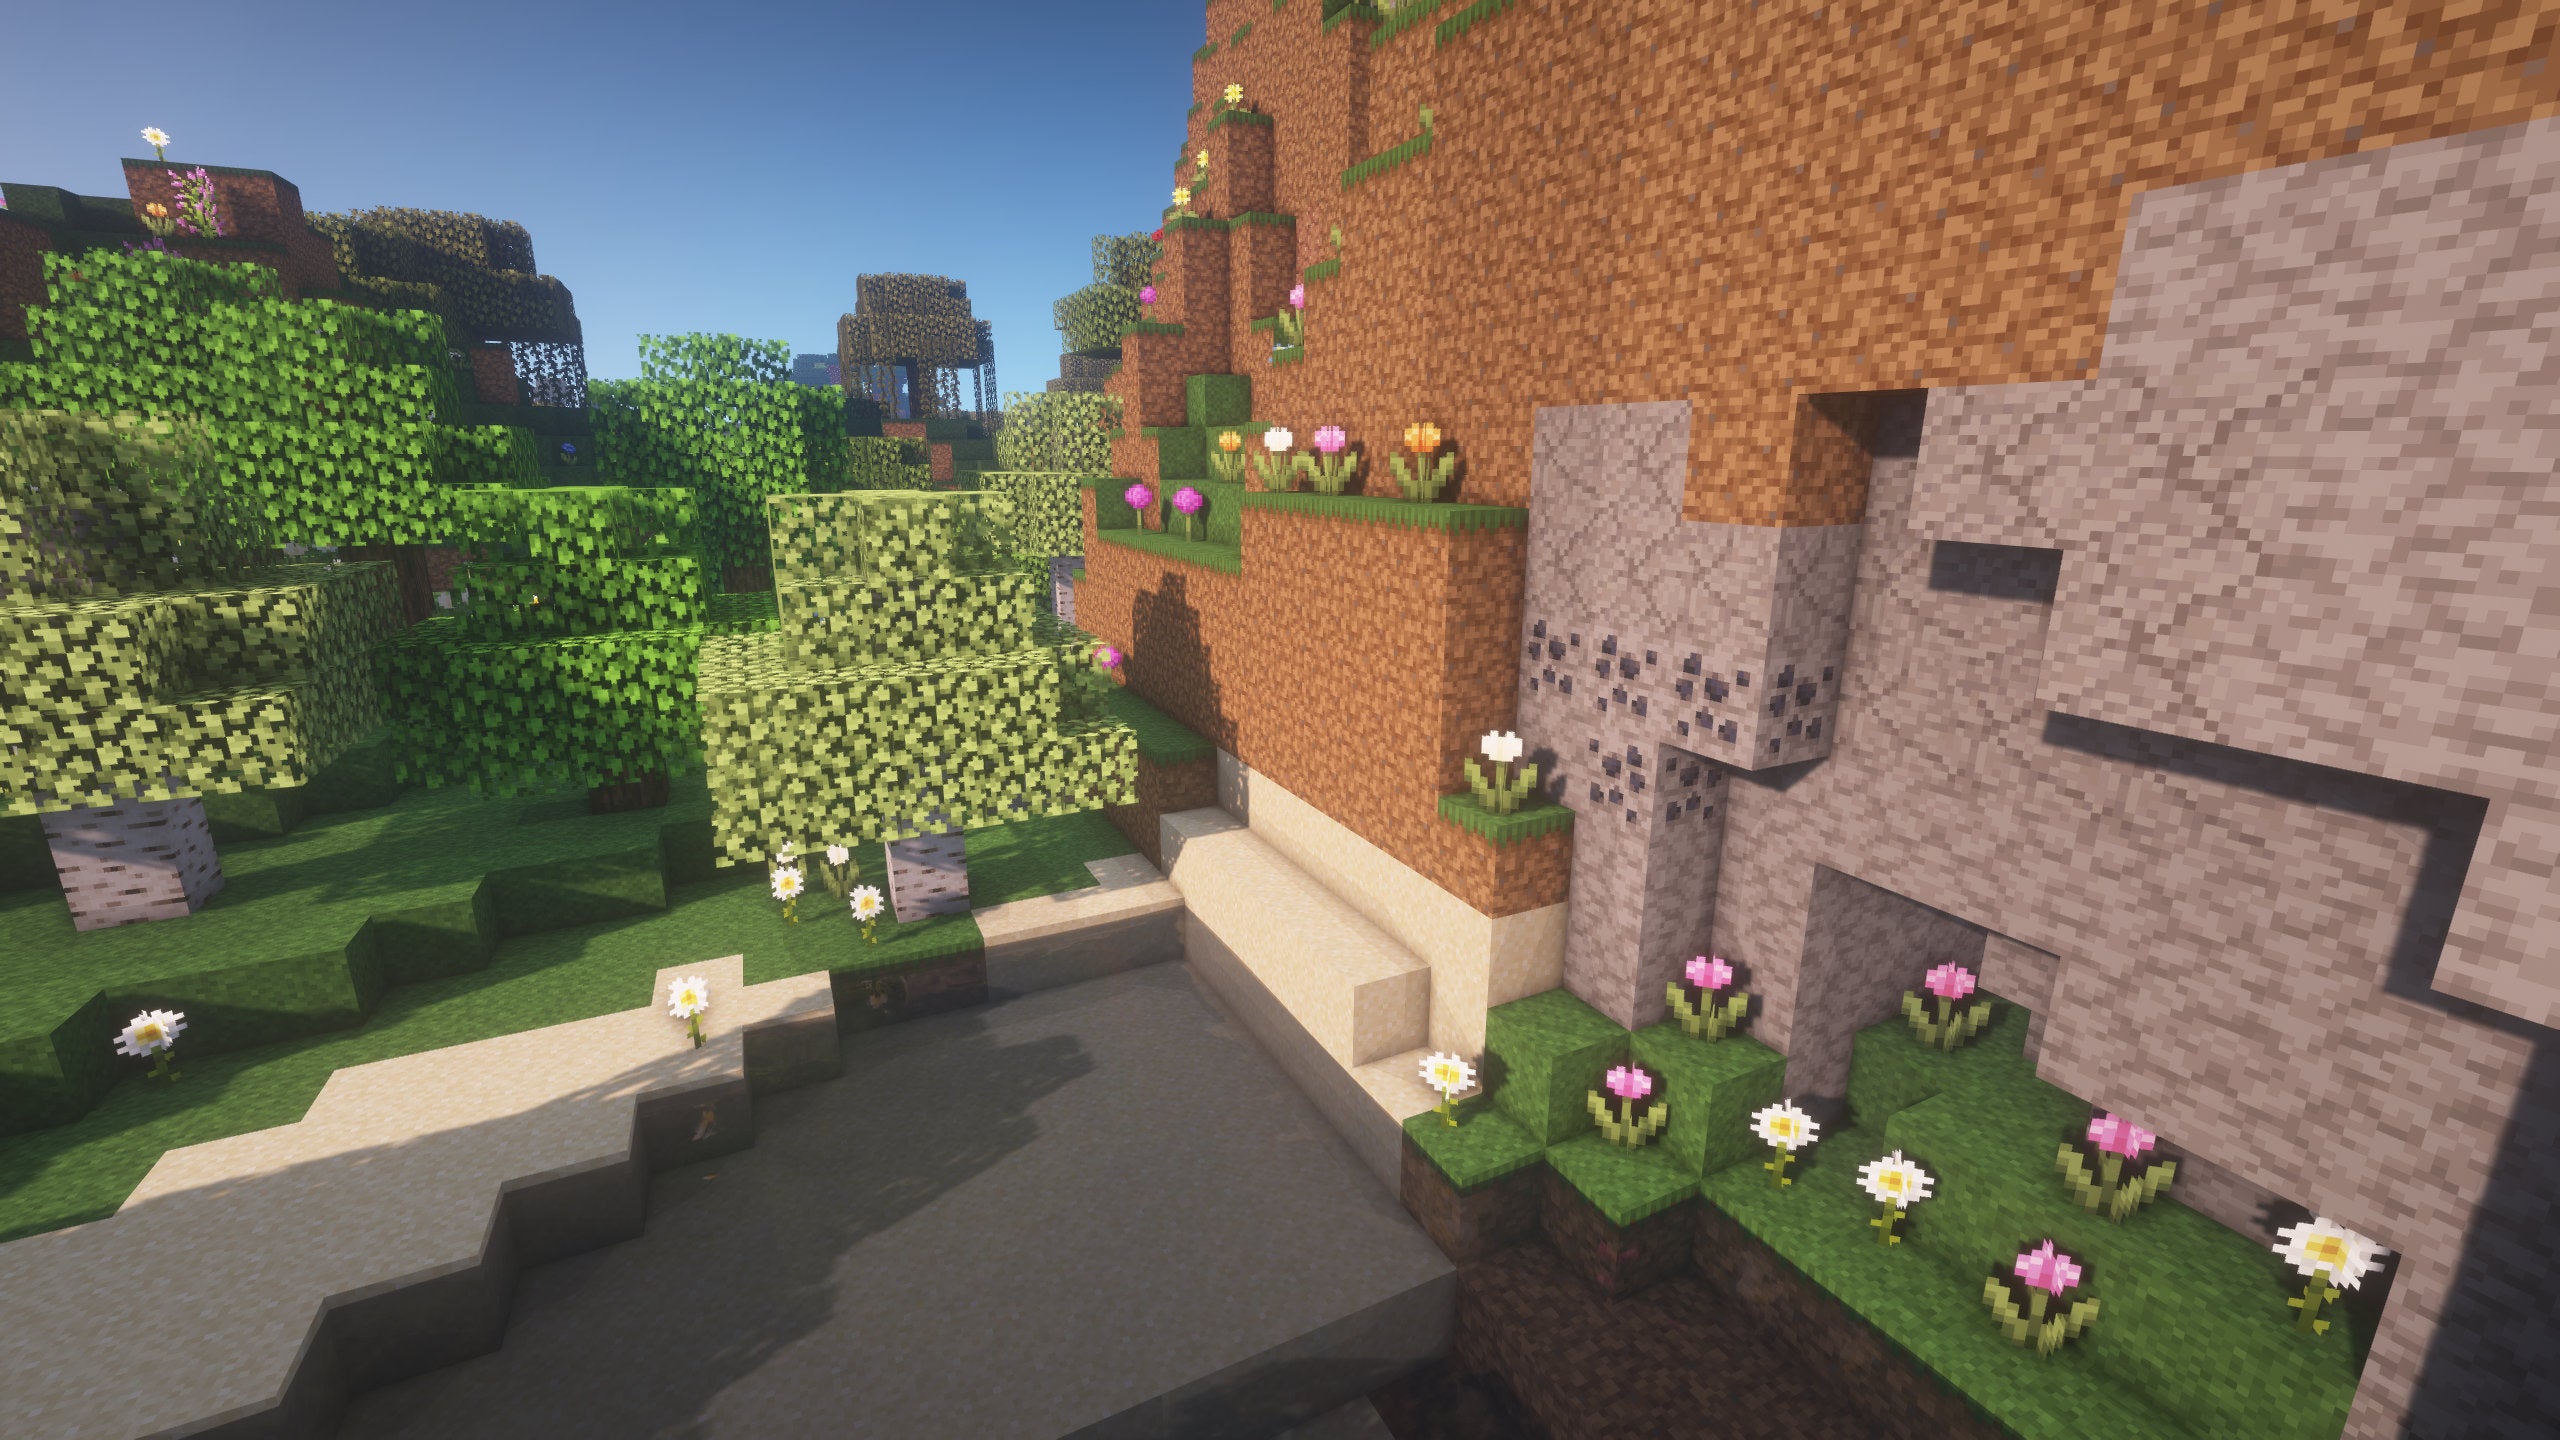 A Minecraft screenshot of a landscape displayed using the Jicklus Texture Pack.